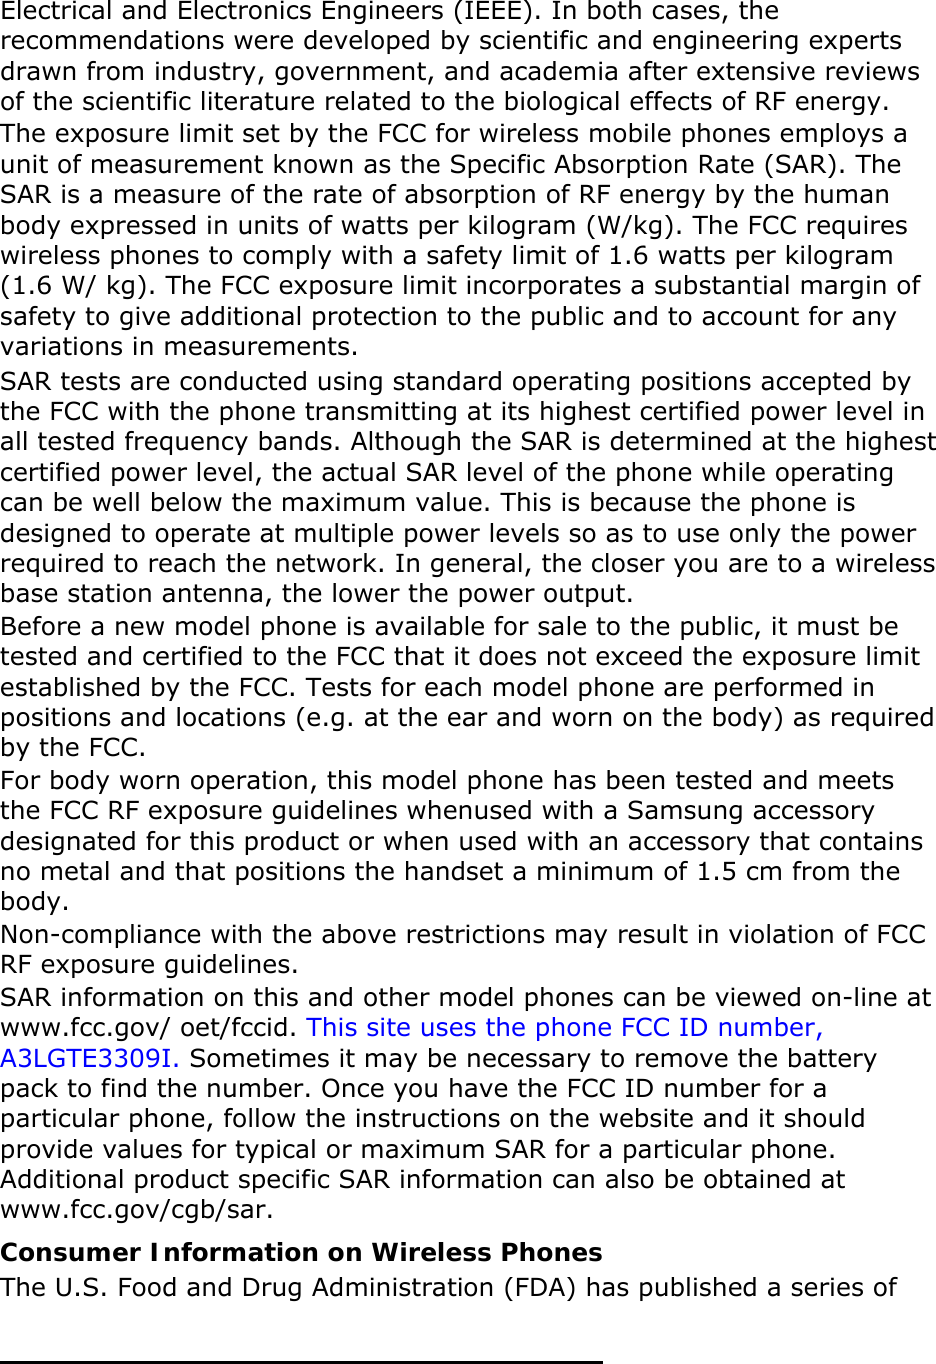 Electrical and Electronics Engineers (IEEE). In both cases, the recommendations were developed by scientific and engineering experts drawn from industry, government, and academia after extensive reviews of the scientific literature related to the biological effects of RF energy. The exposure limit set by the FCC for wireless mobile phones employs a unit of measurement known as the Specific Absorption Rate (SAR). The SAR is a measure of the rate of absorption of RF energy by the human body expressed in units of watts per kilogram (W/kg). The FCC requires wireless phones to comply with a safety limit of 1.6 watts per kilogram (1.6 W/ kg). The FCC exposure limit incorporates a substantial margin of safety to give additional protection to the public and to account for any variations in measurements. SAR tests are conducted using standard operating positions accepted by the FCC with the phone transmitting at its highest certified power level in all tested frequency bands. Although the SAR is determined at the highest certified power level, the actual SAR level of the phone while operating can be well below the maximum value. This is because the phone is designed to operate at multiple power levels so as to use only the power required to reach the network. In general, the closer you are to a wireless base station antenna, the lower the power output. Before a new model phone is available for sale to the public, it must be tested and certified to the FCC that it does not exceed the exposure limit established by the FCC. Tests for each model phone are performed in positions and locations (e.g. at the ear and worn on the body) as required by the FCC.      For body worn operation, this model phone has been tested and meets the FCC RF exposure guidelines whenused with a Samsung accessory designated for this product or when used with an accessory that contains no metal and that positions the handset a minimum of 1.5 cm from the body.  Non-compliance with the above restrictions may result in violation of FCC RF exposure guidelines. SAR information on this and other model phones can be viewed on-line at www.fcc.gov/ oet/fccid. This site uses the phone FCC ID number, A3LGTE3309I. Sometimes it may be necessary to remove the battery pack to find the number. Once you have the FCC ID number for a particular phone, follow the instructions on the website and it should provide values for typical or maximum SAR for a particular phone. Additional product specific SAR information can also be obtained at www.fcc.gov/cgb/sar. Consumer Information on Wireless Phones The U.S. Food and Drug Administration (FDA) has published a series of 